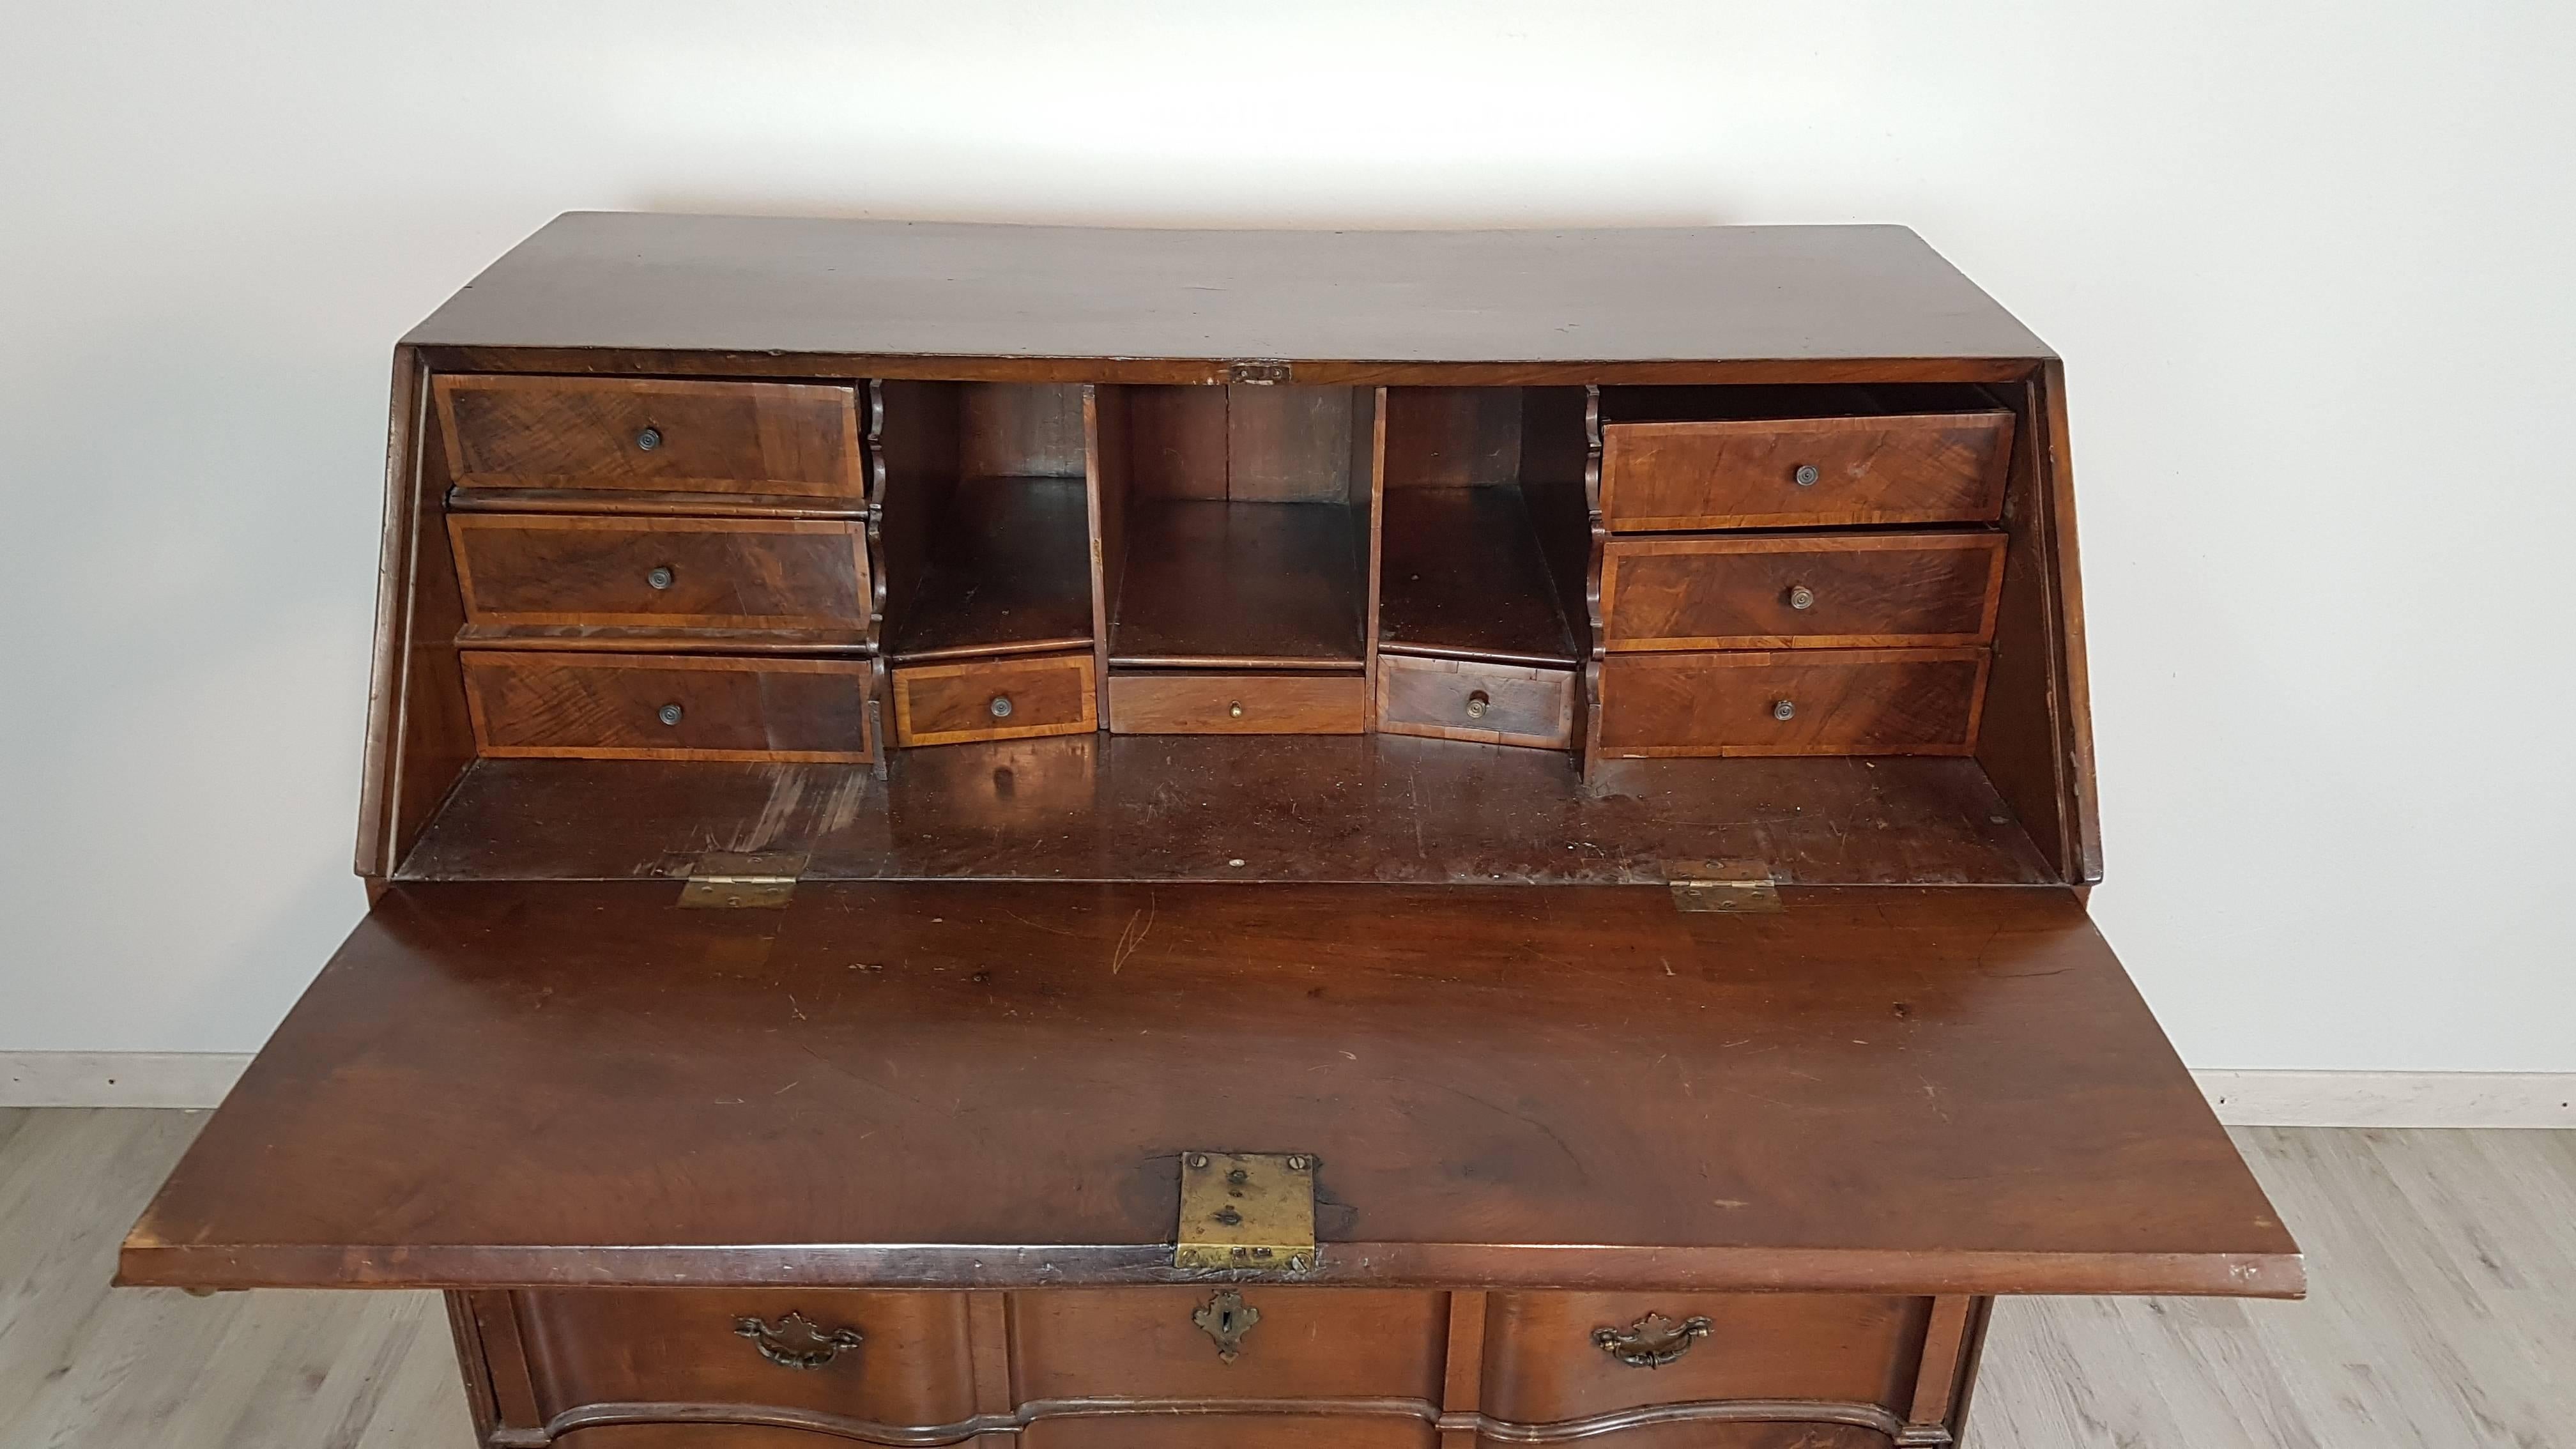 Elegant chest with secretaire of the early 18th century, beautiful from the quality that can only be obtained from workshops of great cabinet-making. The limelight comes in front of drawers moved entirely in solid walnut. Spectacular interior castle